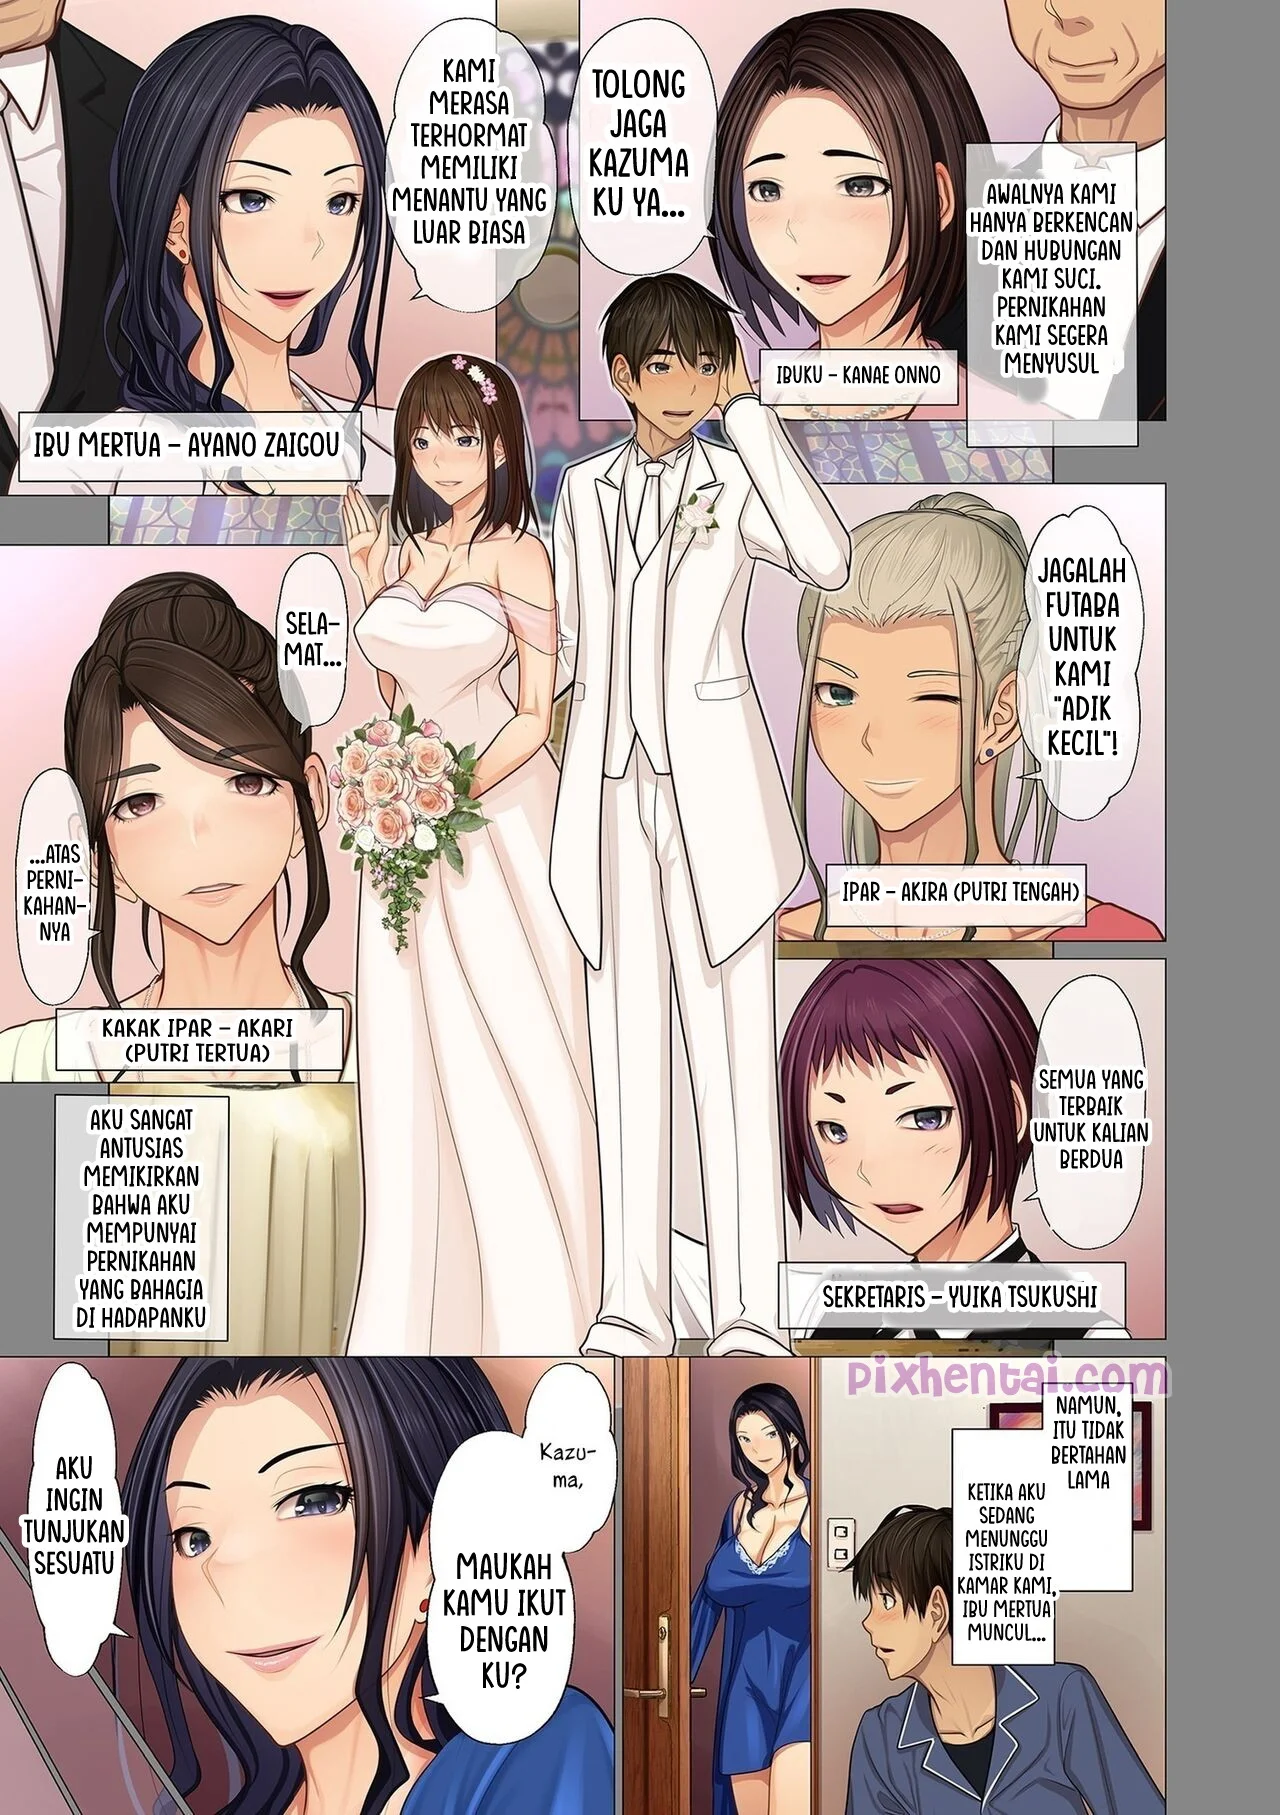 Komik hentai xxx manga sex bokep I married into a wealthy family All the women in the family except my wife are mine part 1 7